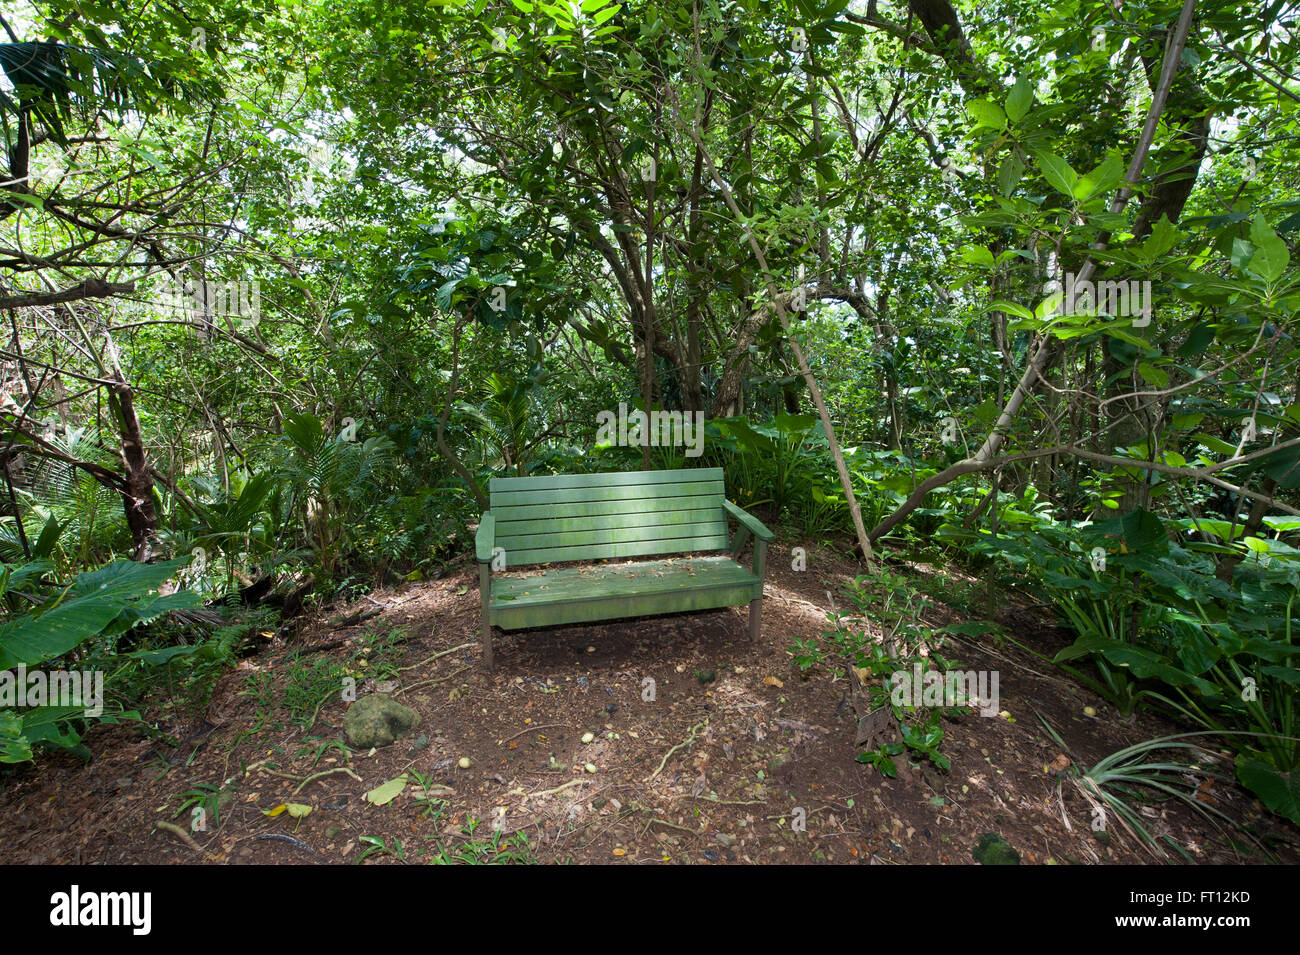 Green bench in a tropical forest, Pitcairn, Pitcairn Group of Islands, British Overseas Territory, South Pacific Stock Photo